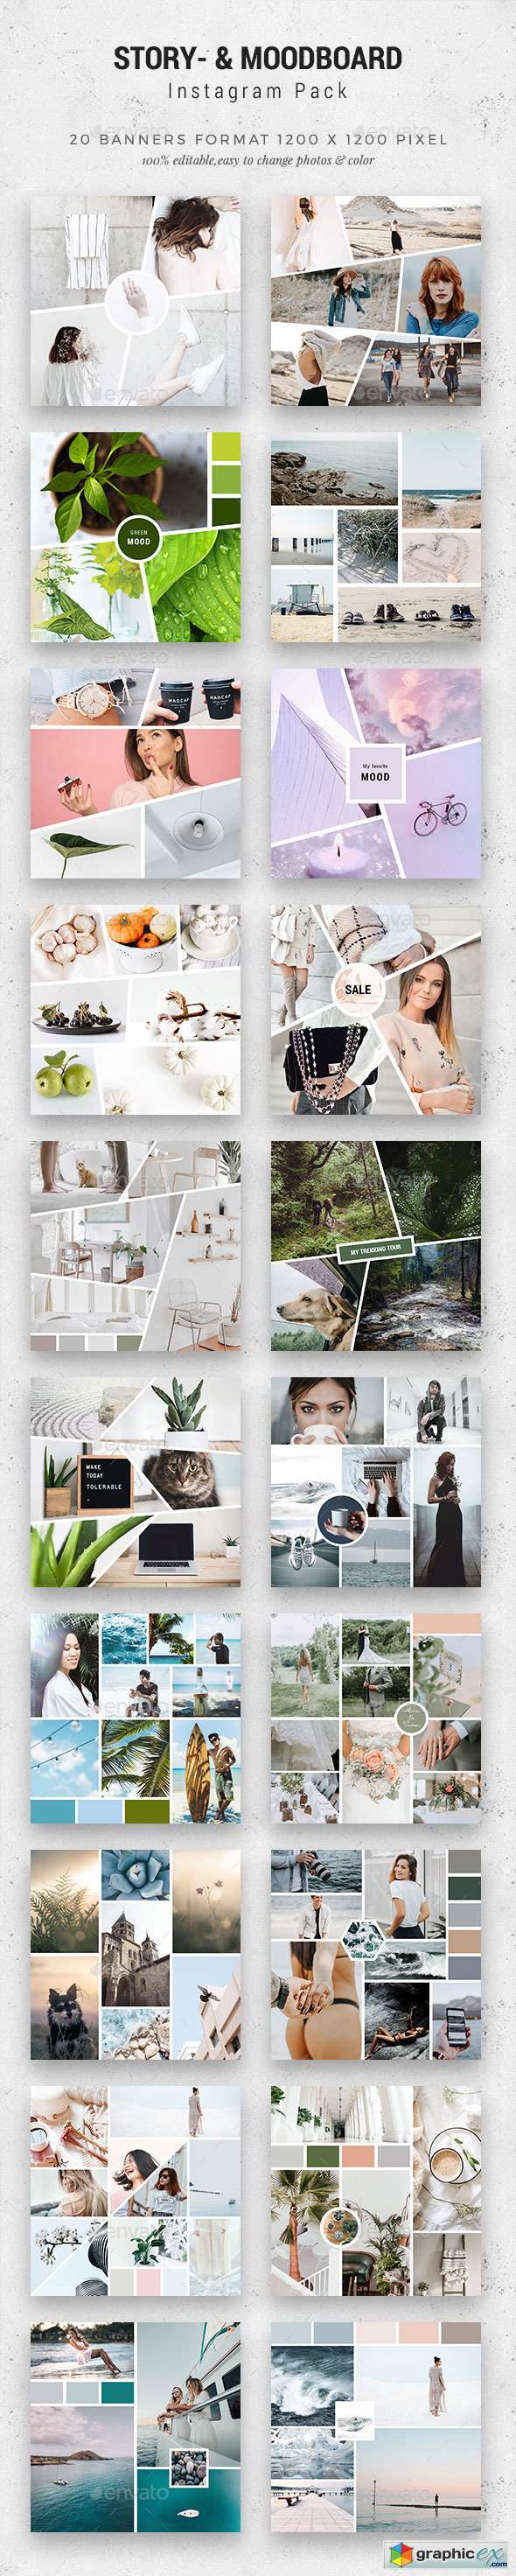 Story-Moodboards for Instagram